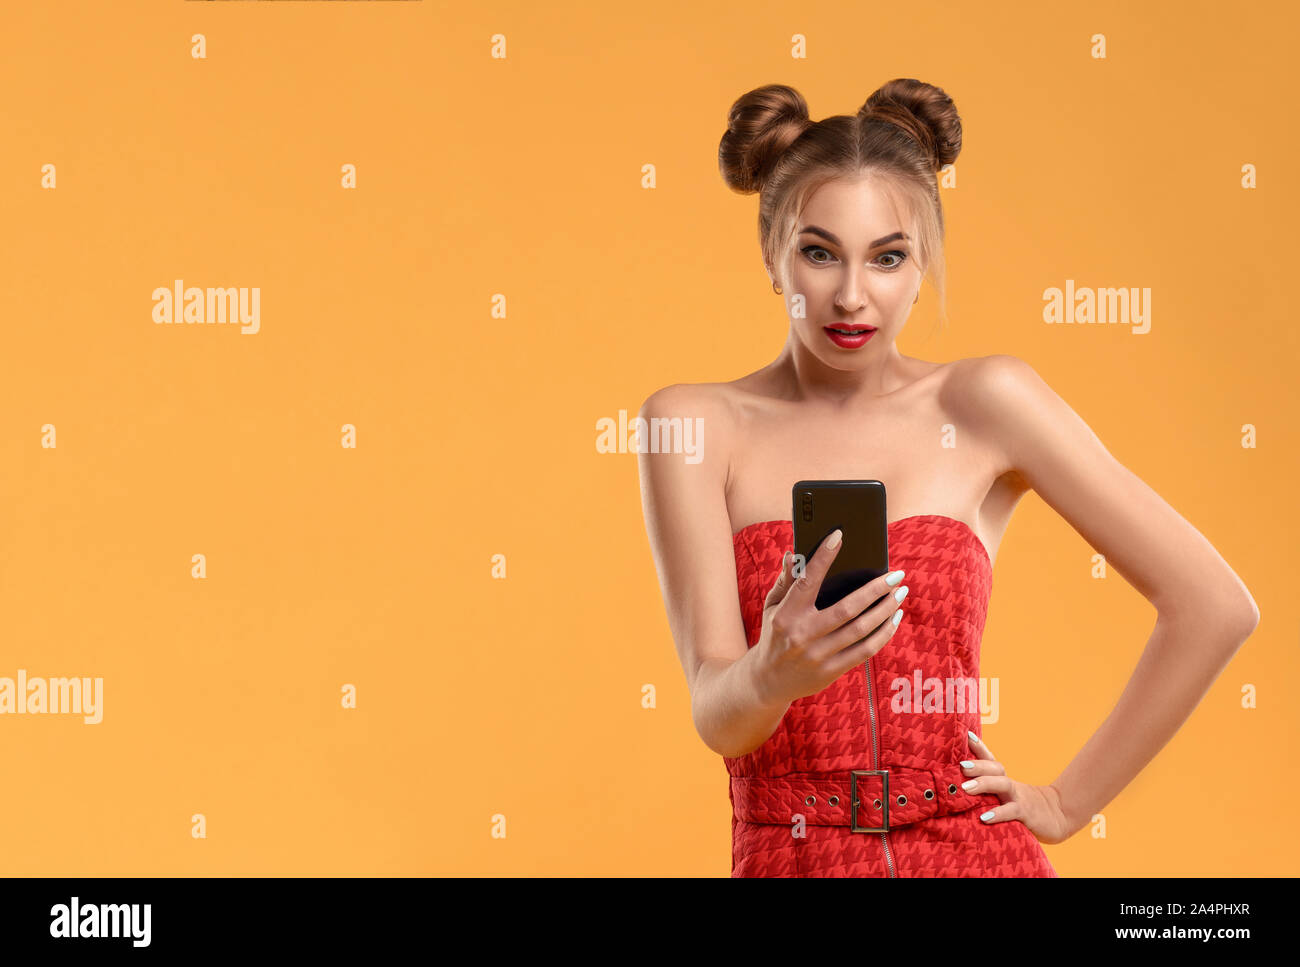 Girl with hair buns holding a smartphone with surprised face isolated on orange background Stock Photo